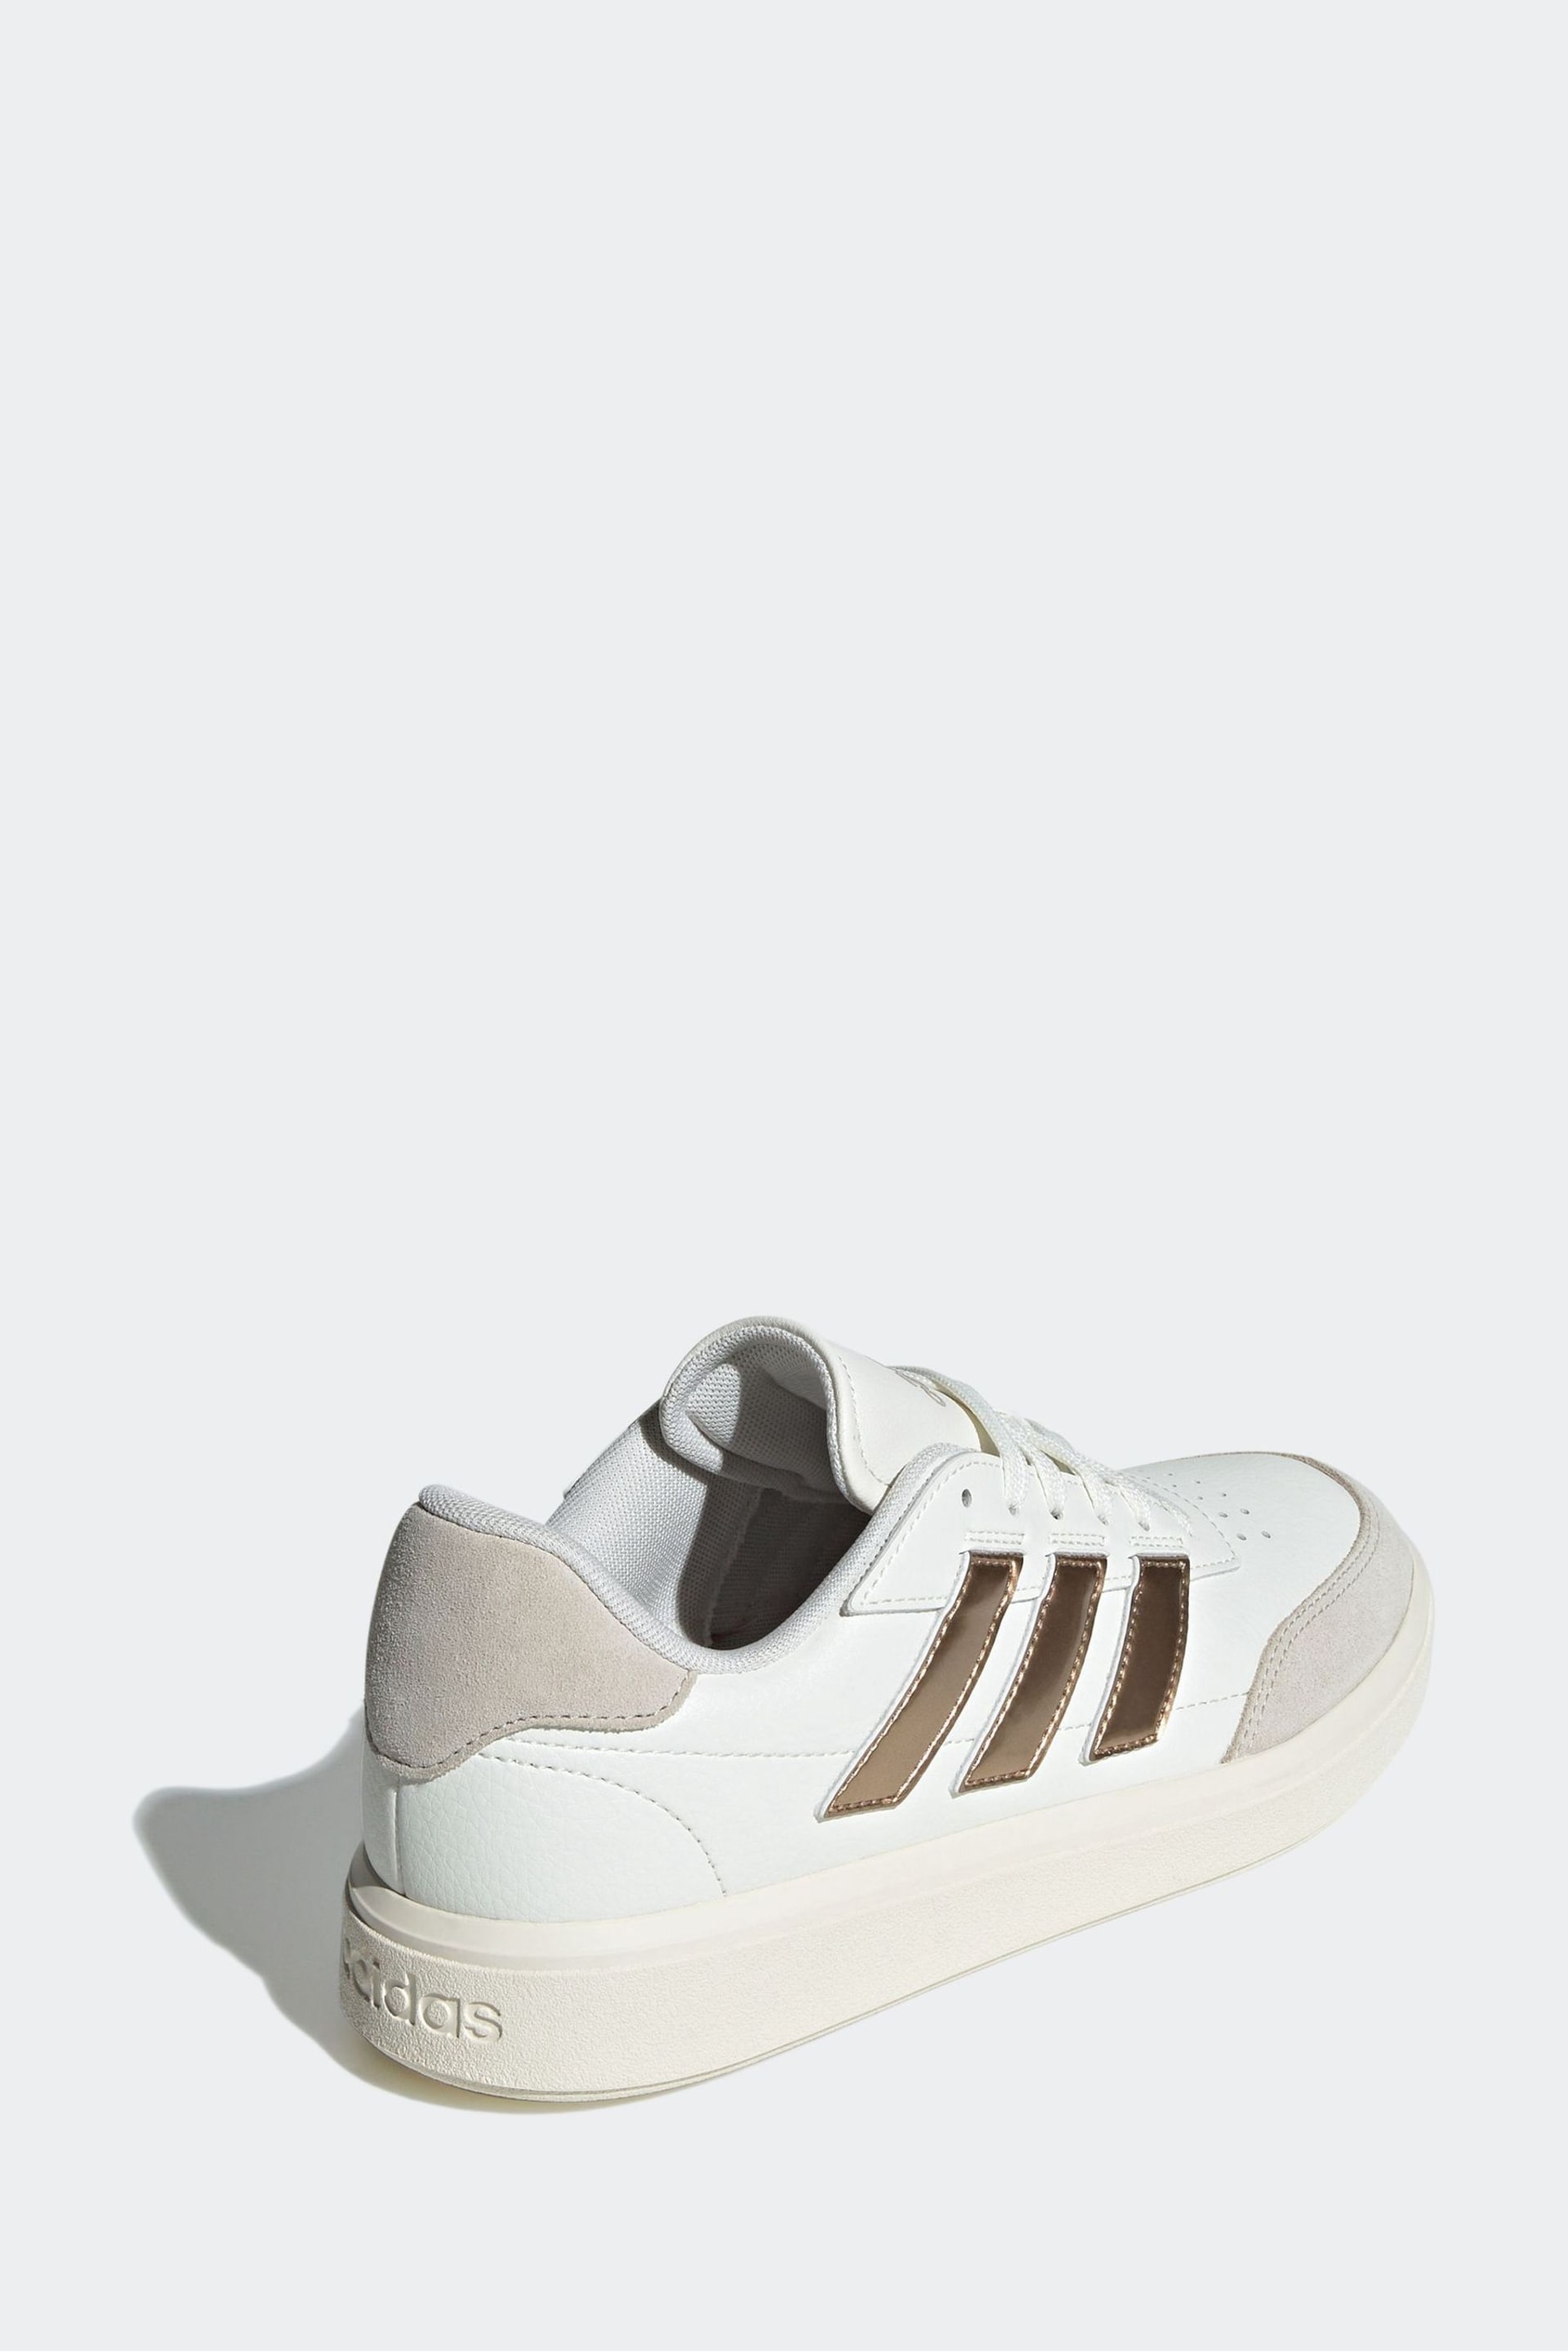 adidas Beige Court Block Trainers - Image 4 of 8